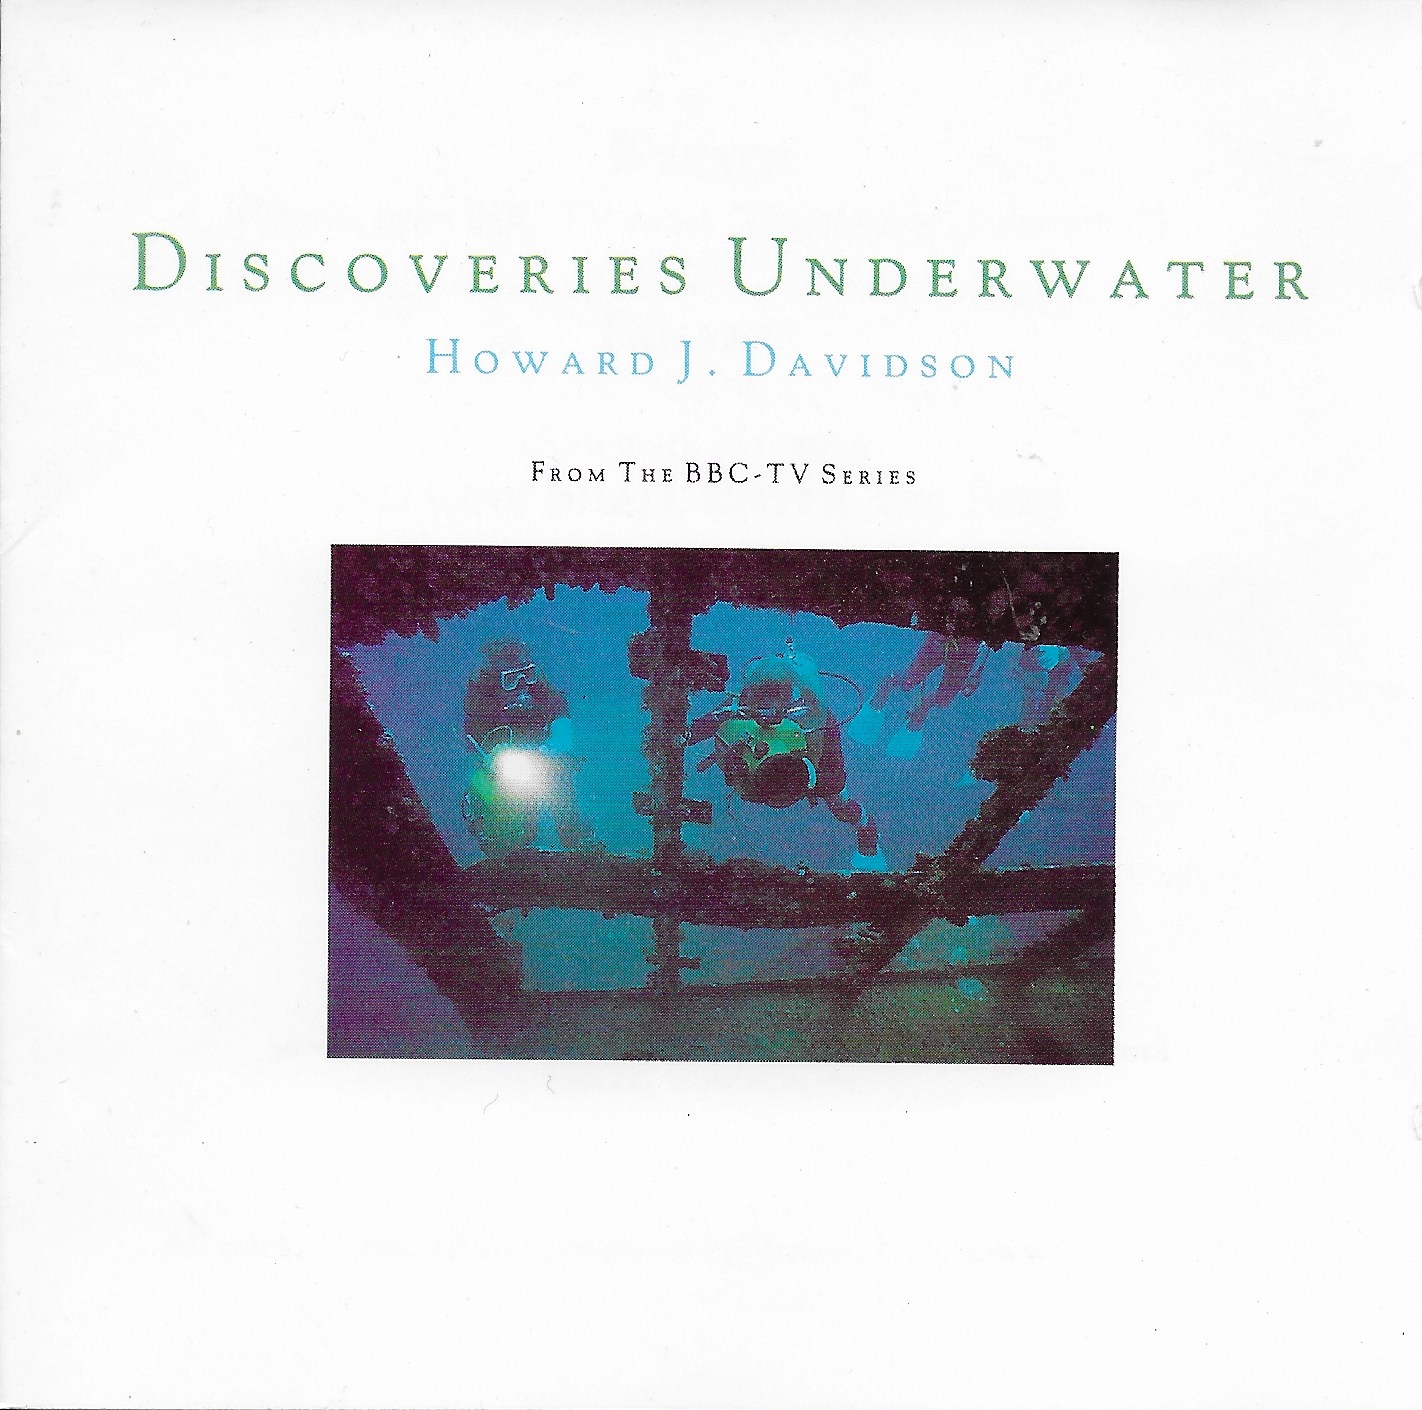 Picture of Discoveries underwater by artist Howard J. Davidson from the BBC cds - Records and Tapes library